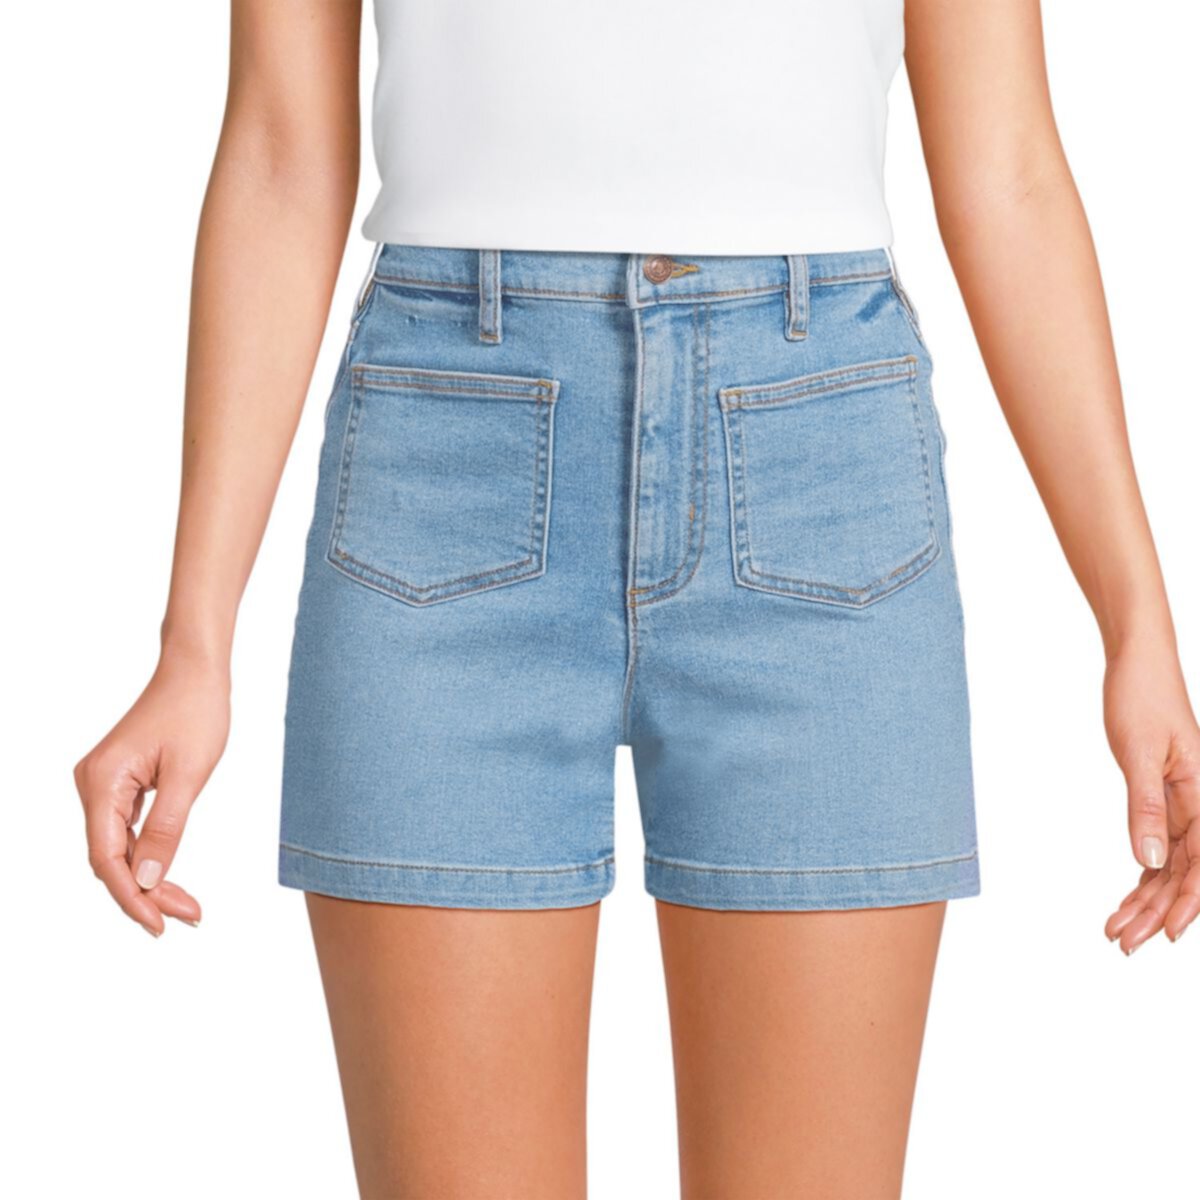 Women's Lands' End Recover High Rise 5-in. Inseam Jean Shorts Lands' End